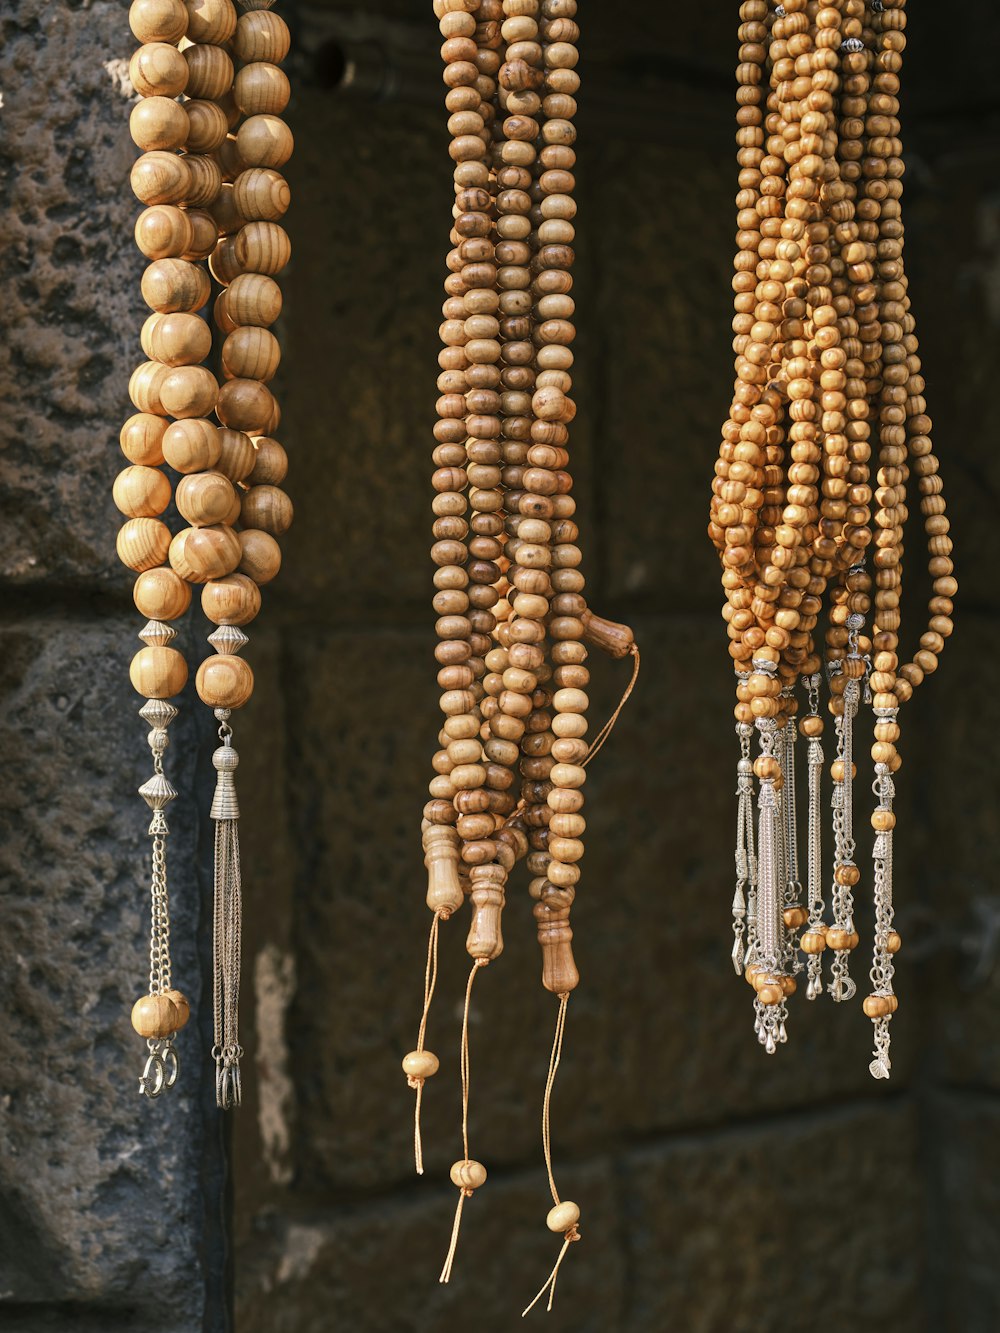 a group of wooden beads hanging from a ceiling